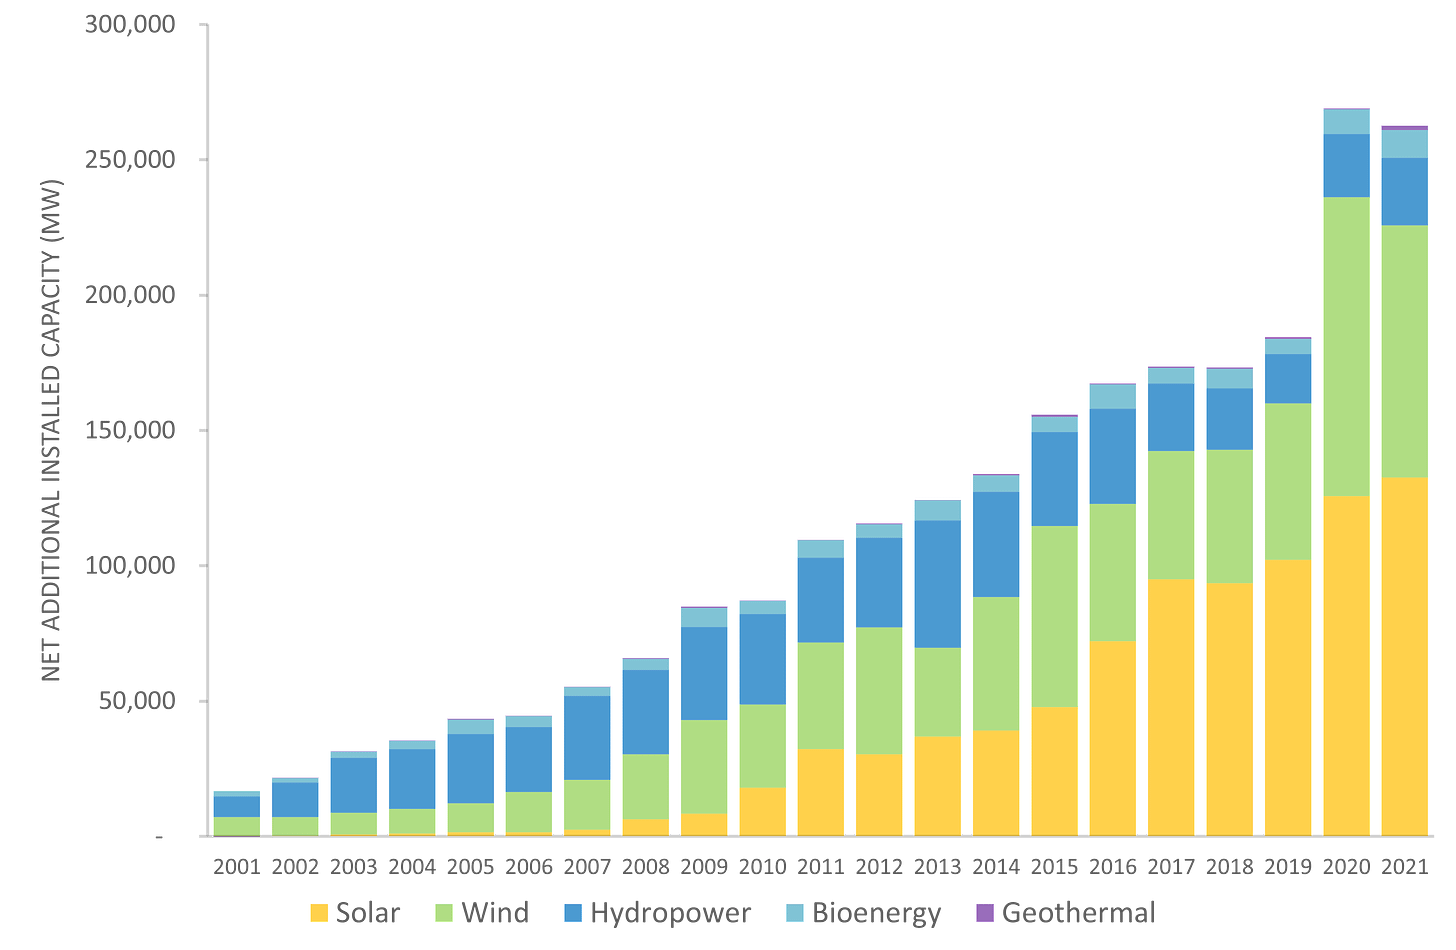 Graph showing net additional installed renewable energy capacity from 2001 to 2021. Growth has been particularly notable for solar power.